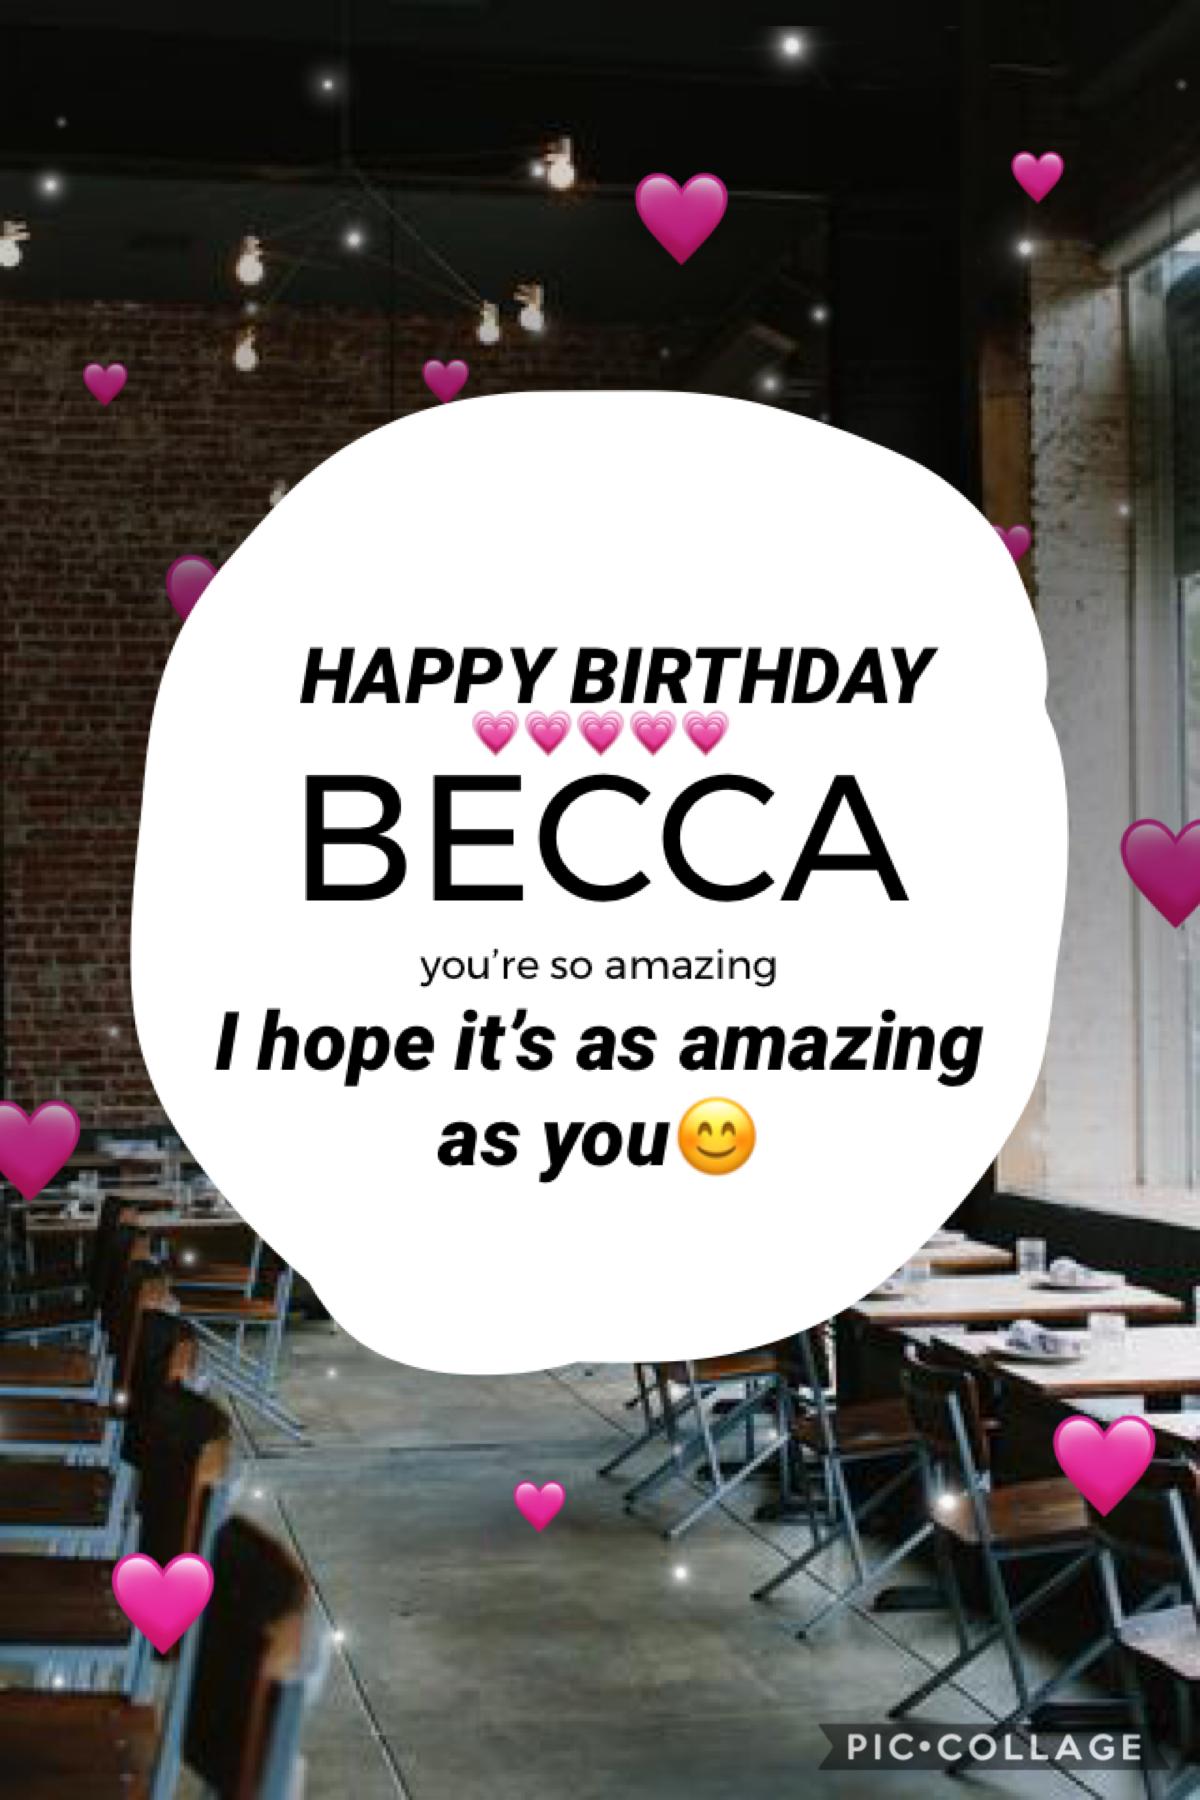 HAPPY BIRTHDAY🥳🥳
For anyone wondering why I deleted the other bday message it’s cuz this one is cooler 😂
Everyone go wish Becca a happy birthday right now💗💗💗